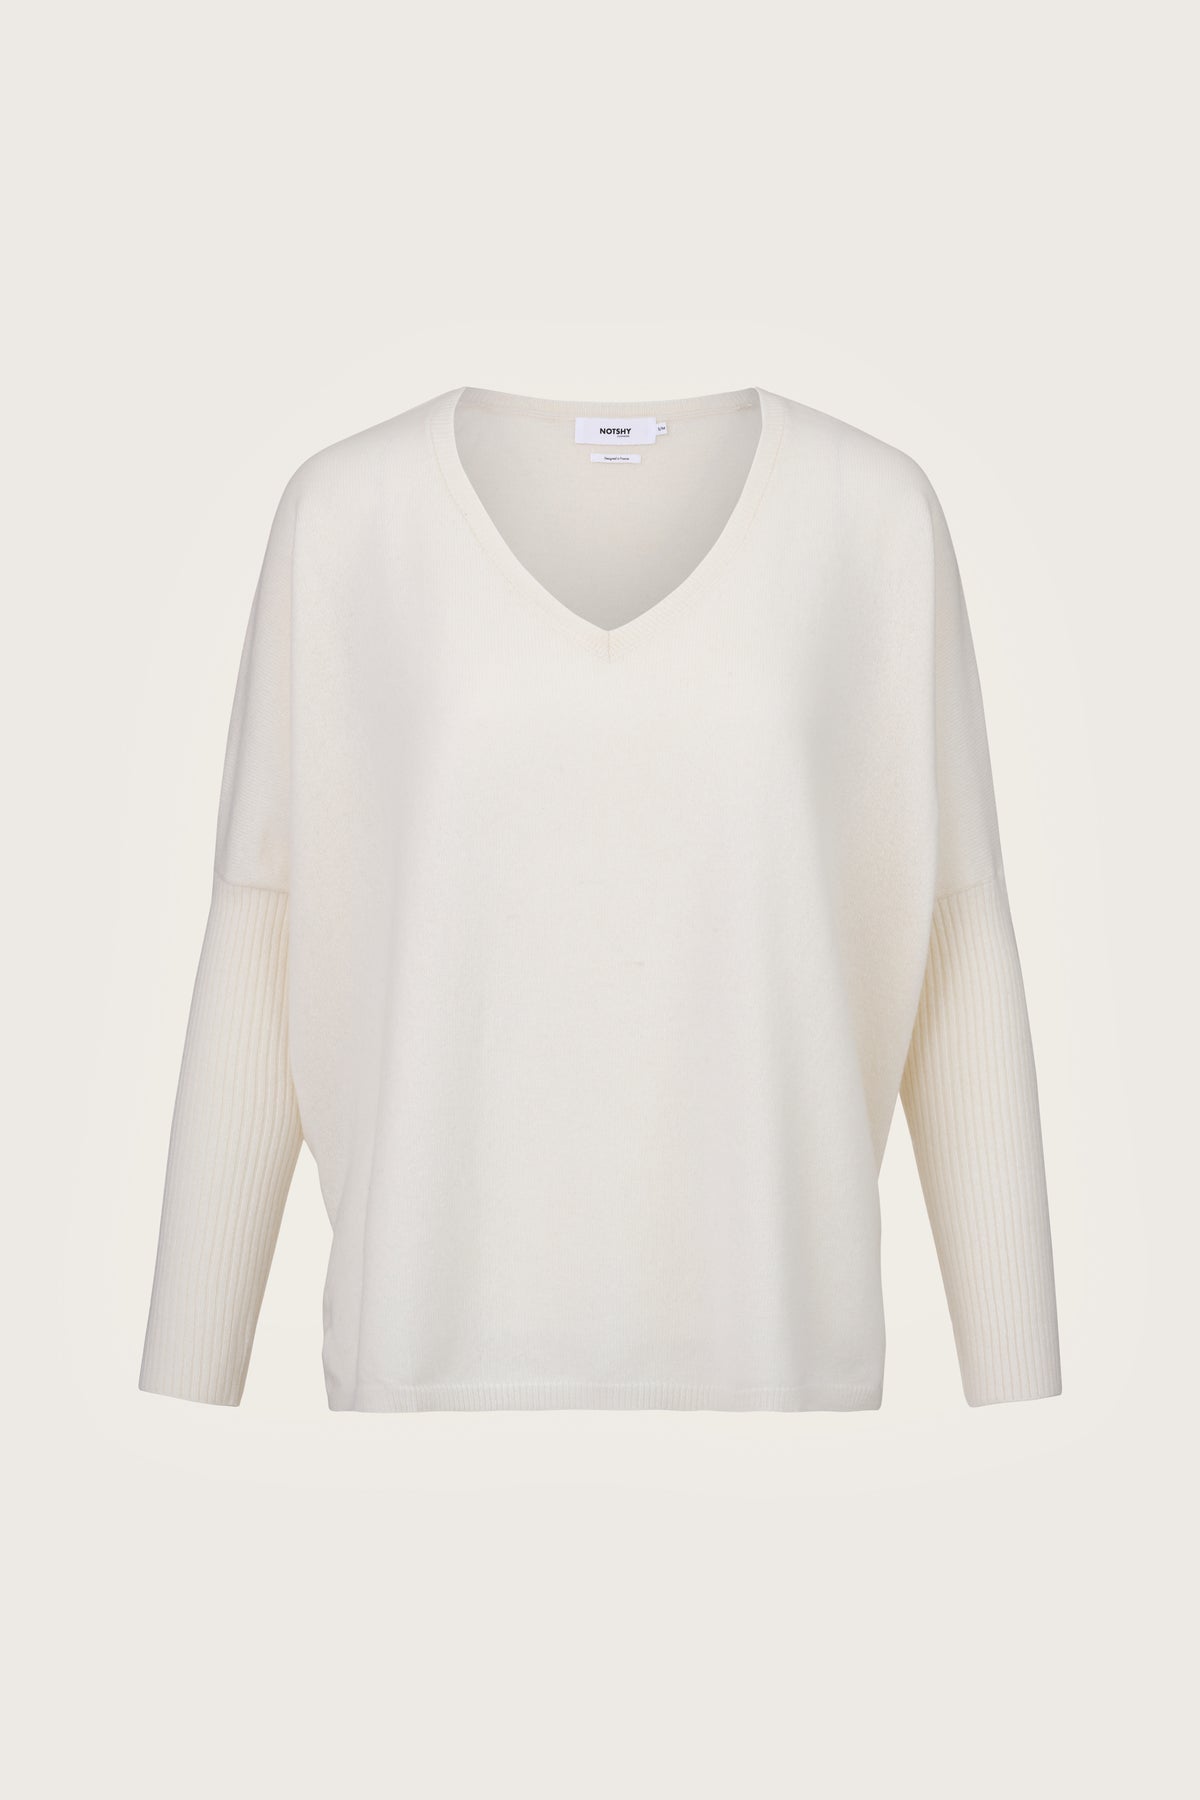 Winter white v neck jumper with dropped shoulders and tight sleeves